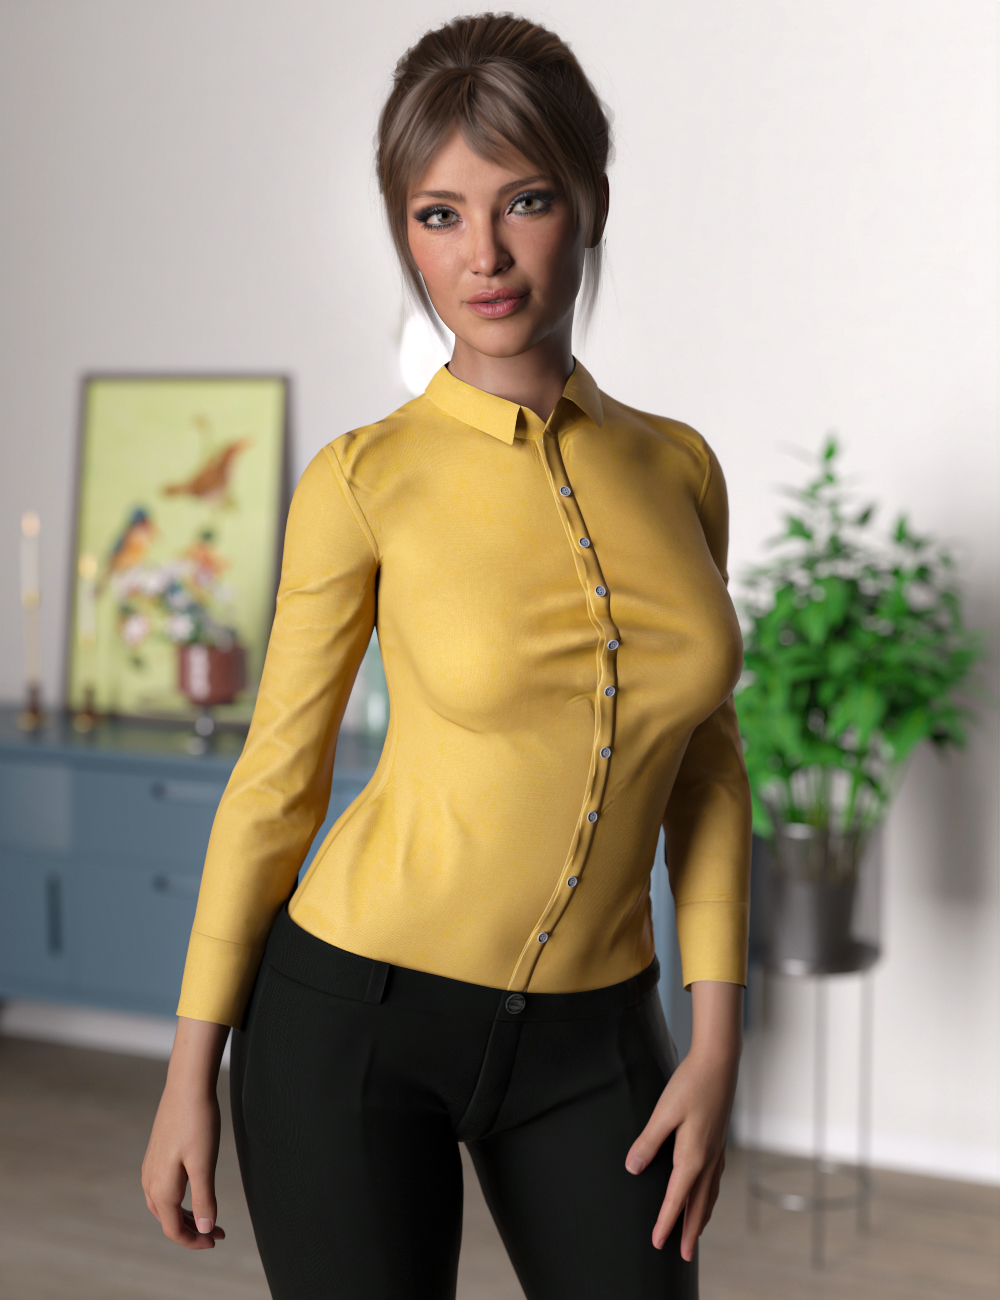 MDU dForce Blouse for Genesis 8 and 8.1 Females by: chungdan, 3D Models by Daz 3D